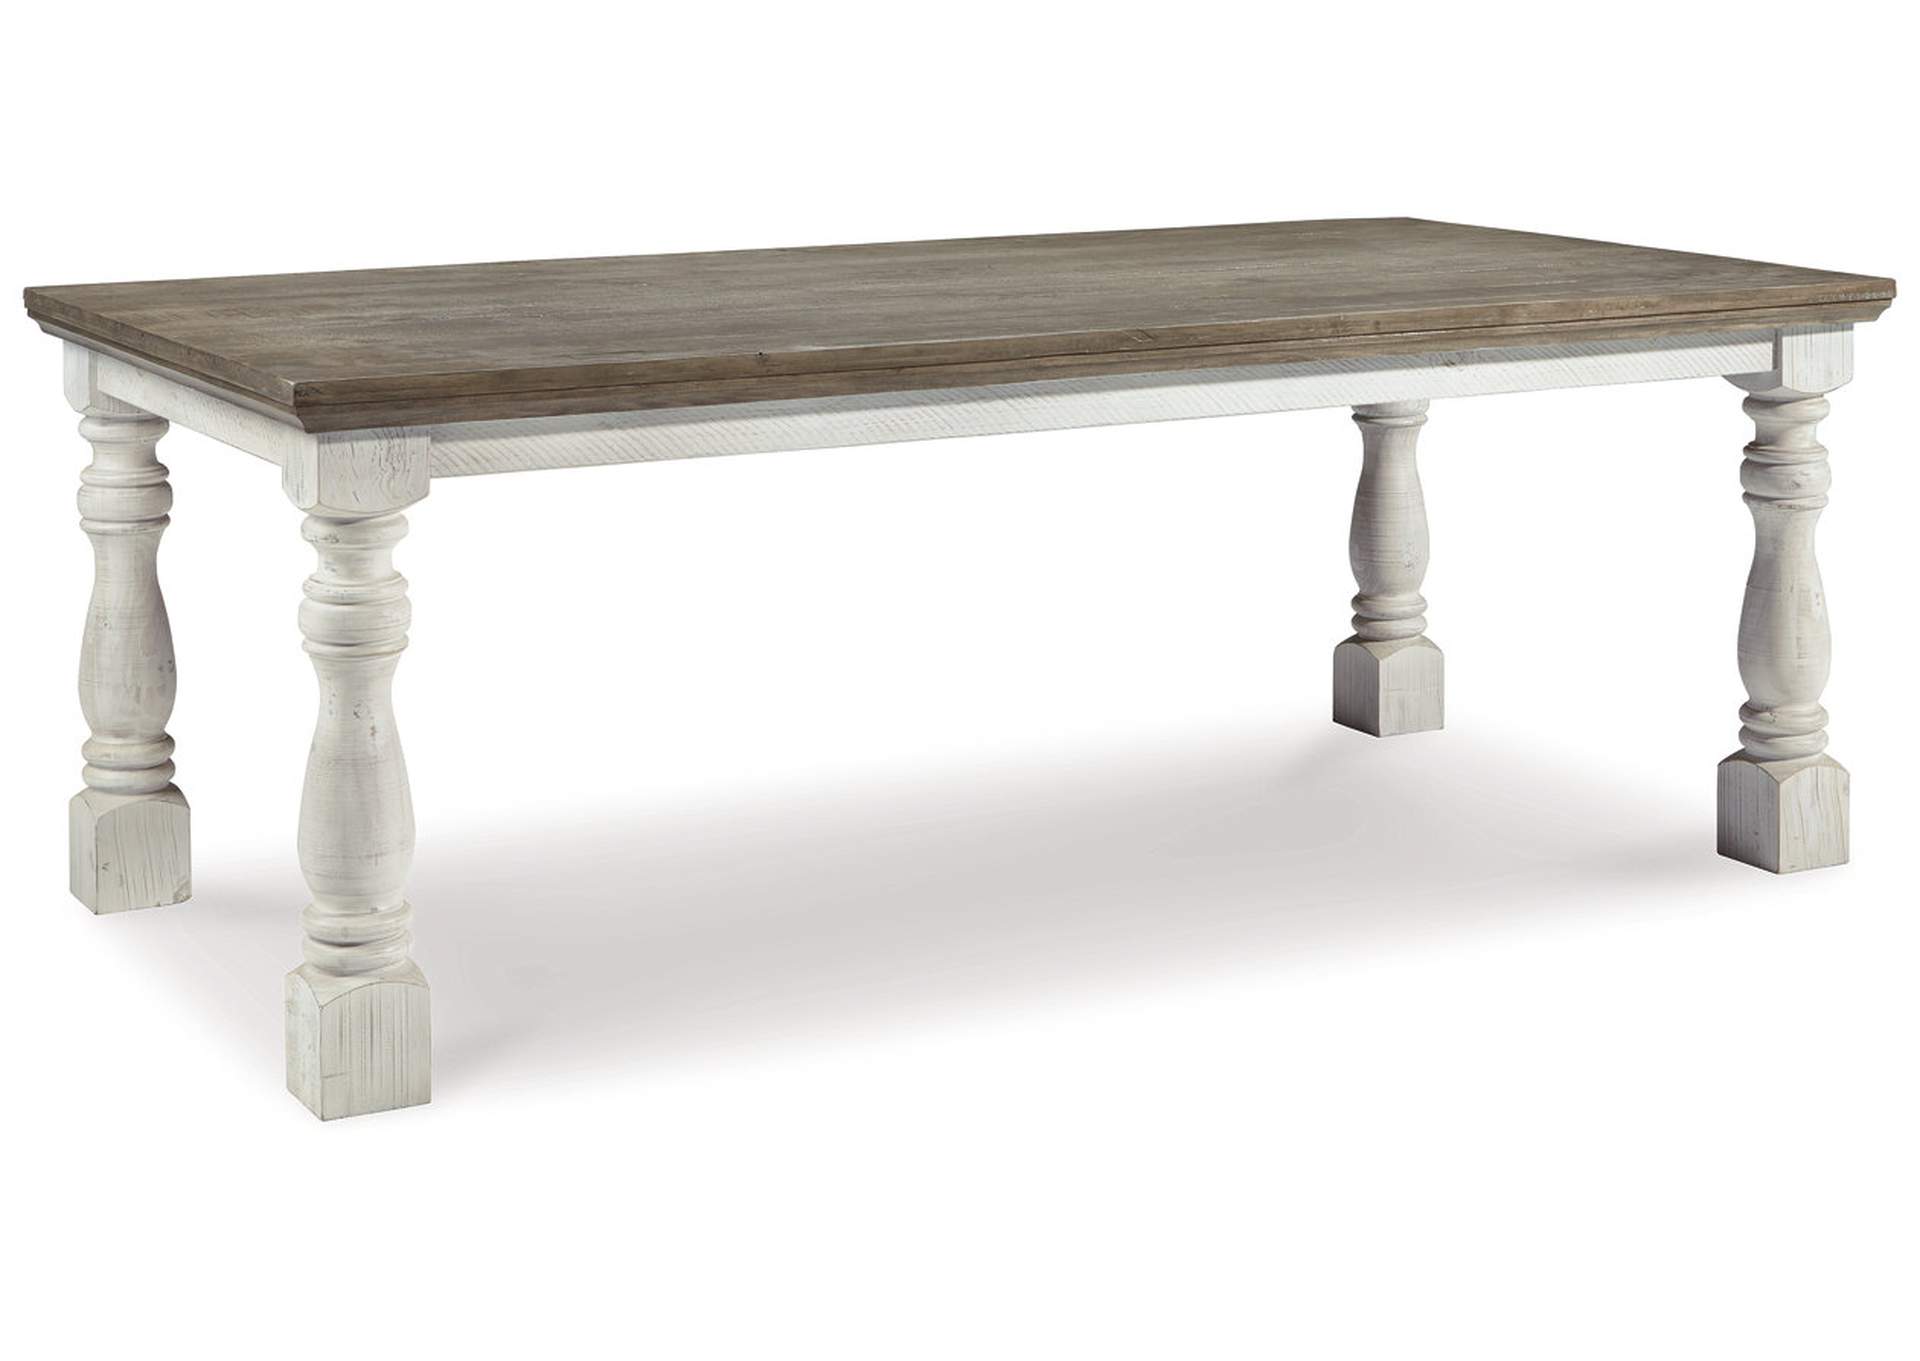 The Havalance Dining Table